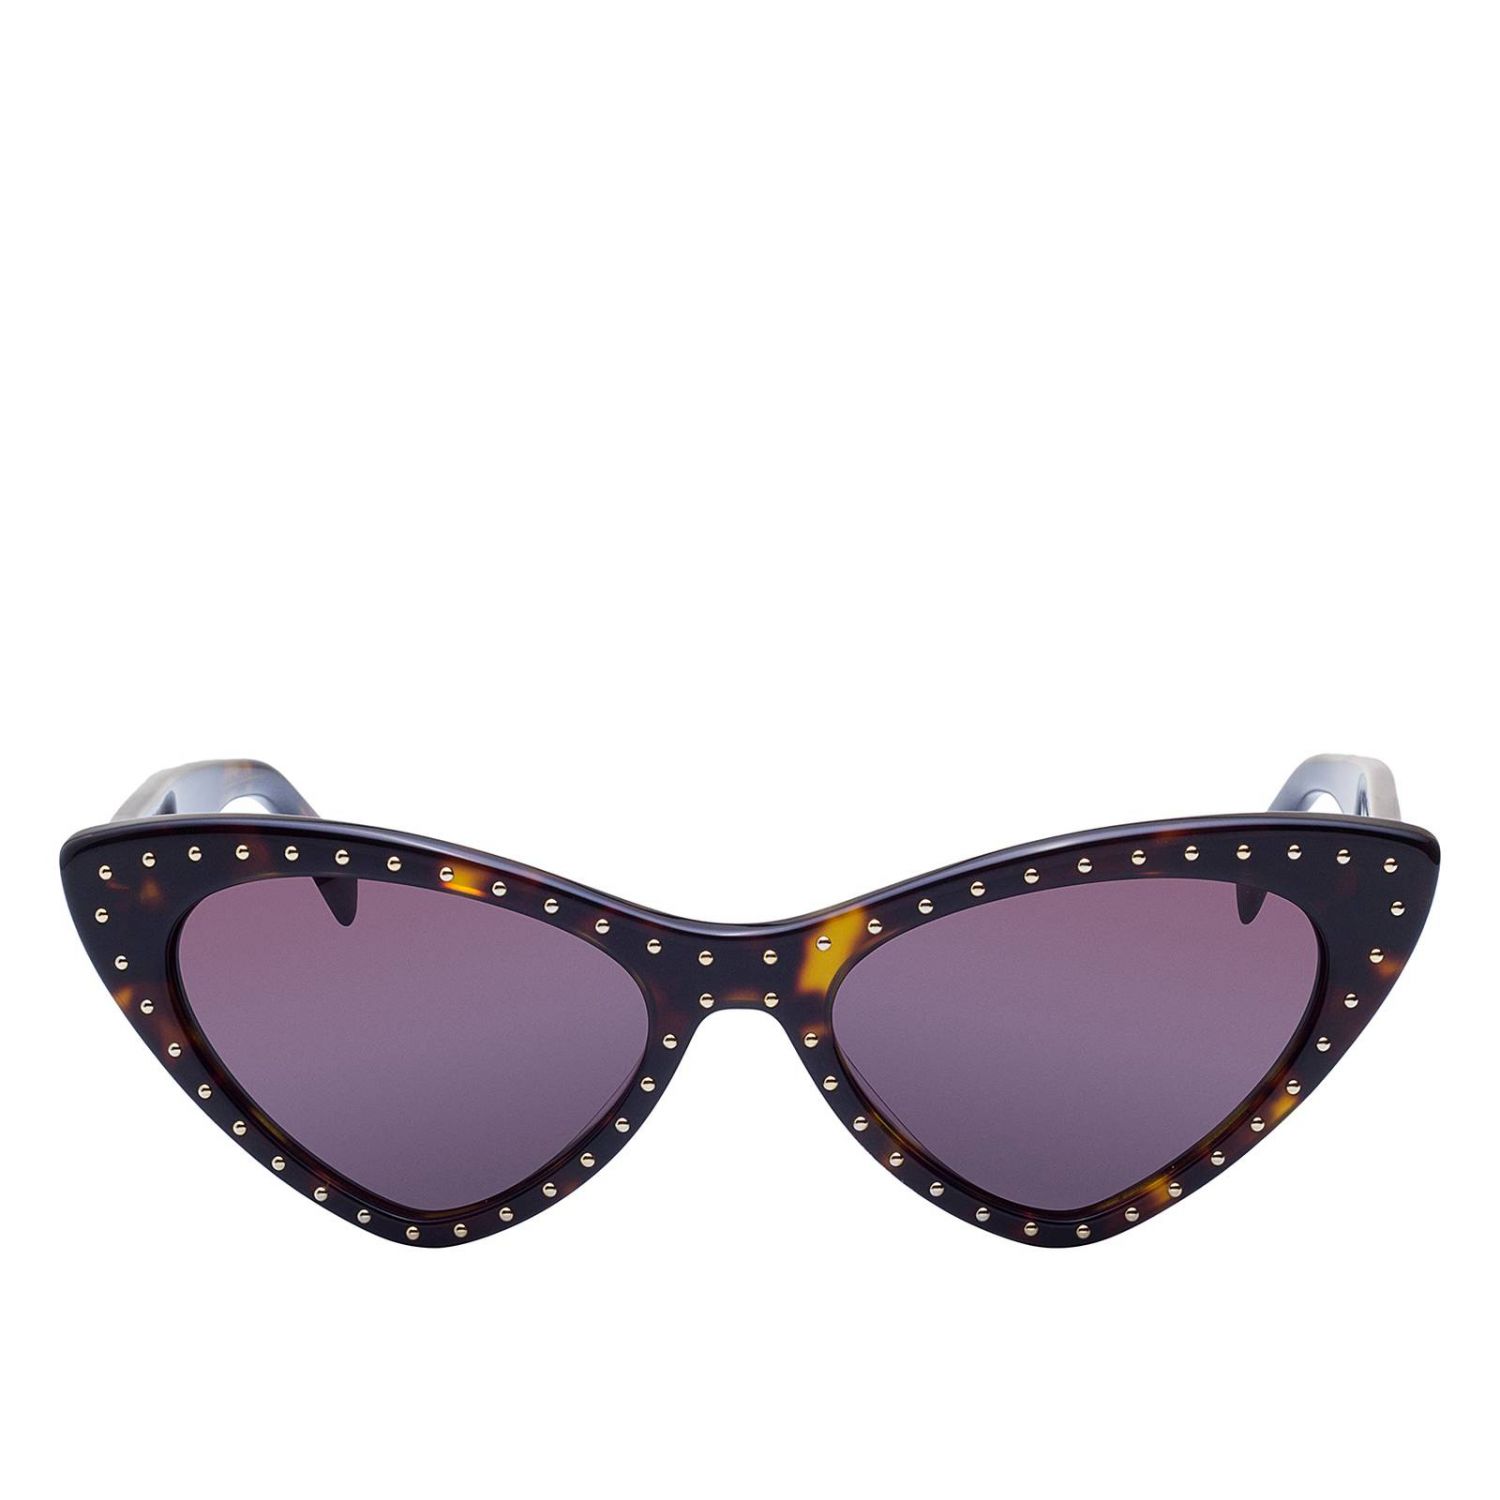 Moschino Outlet: Sunglasses women - Violet | Glasses Moschino MOS006/S ...